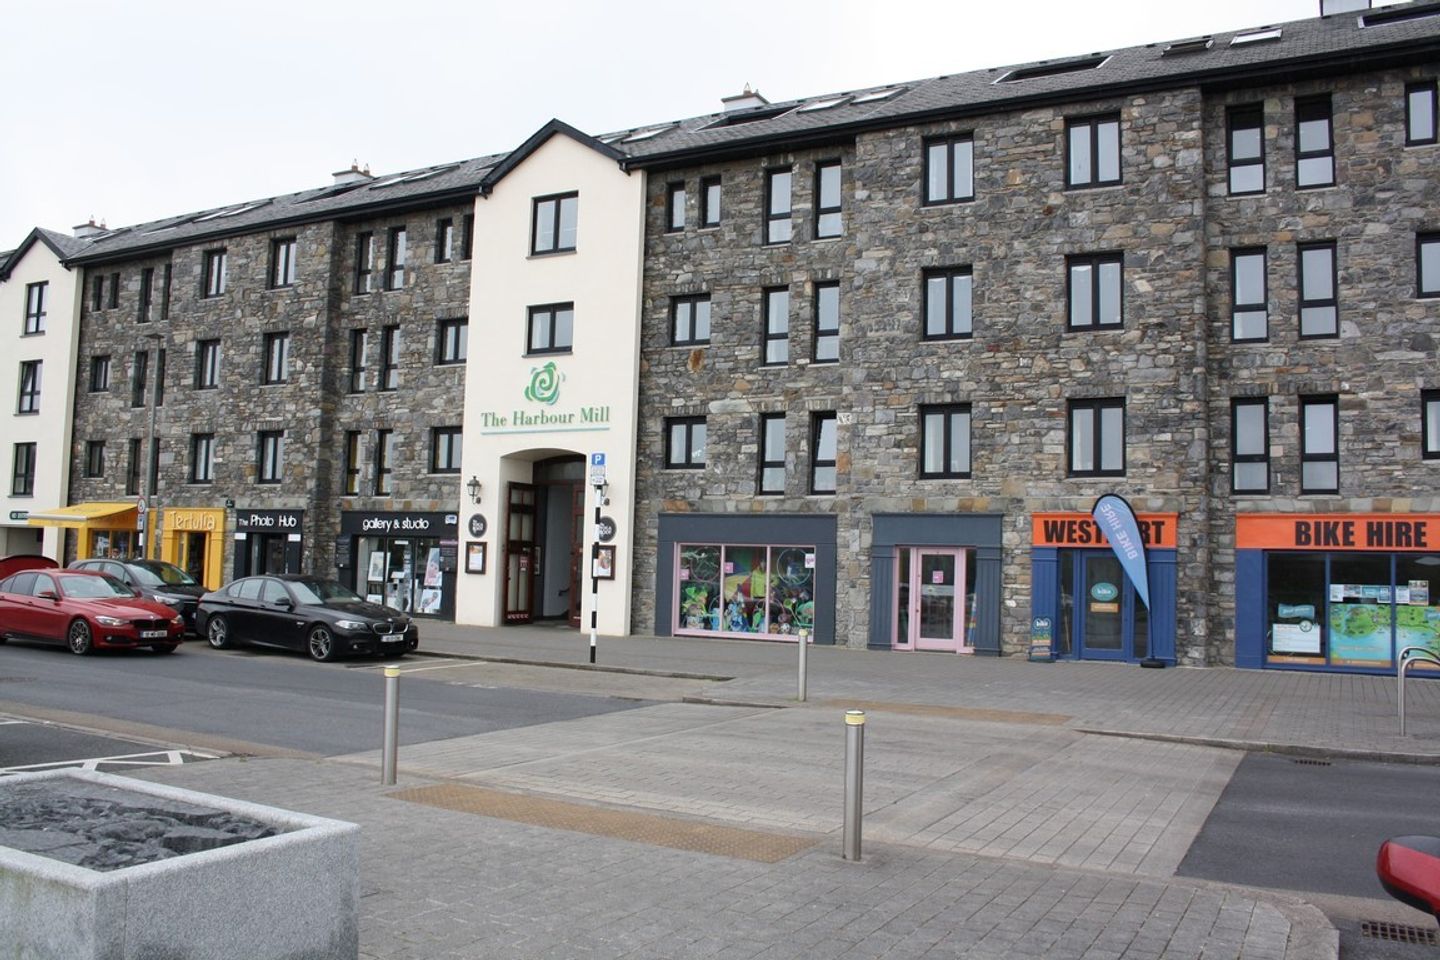 Apartment 216, The Harbour Mill, Westport, Co. Mayo